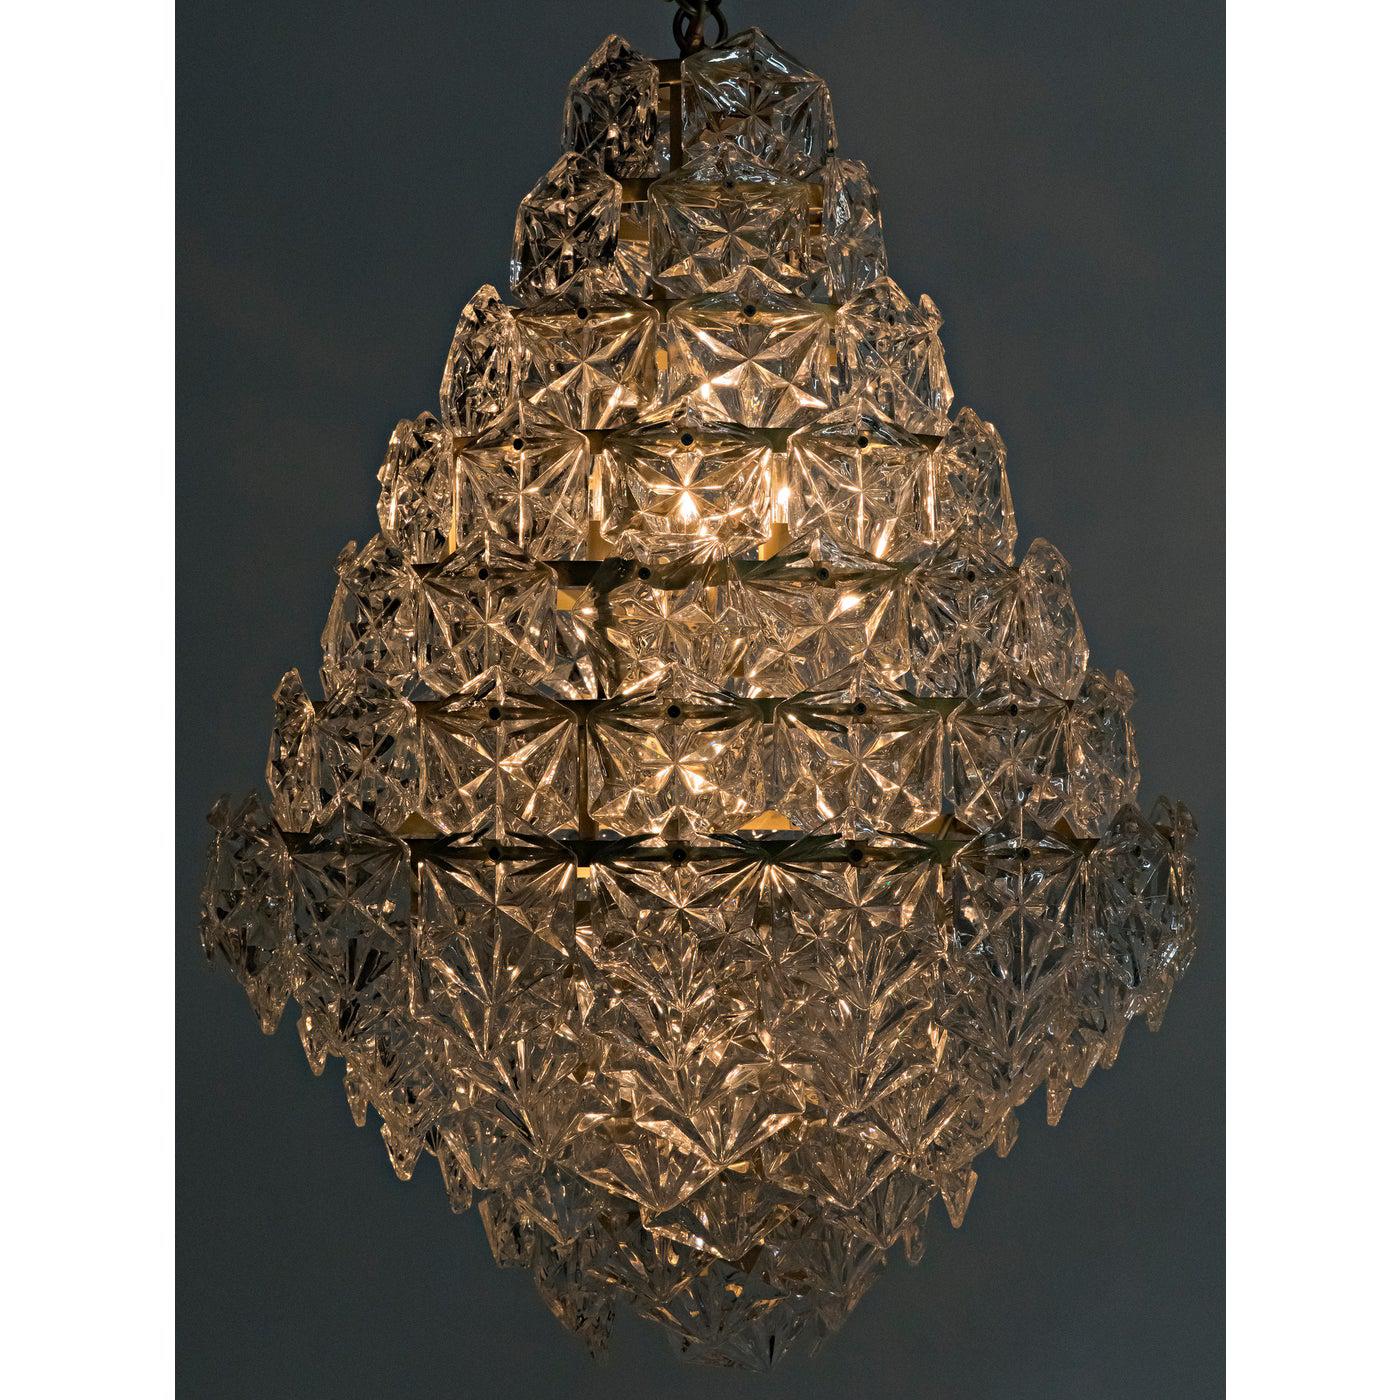 Neive Chandelier, Large, Metal with Brass Finish